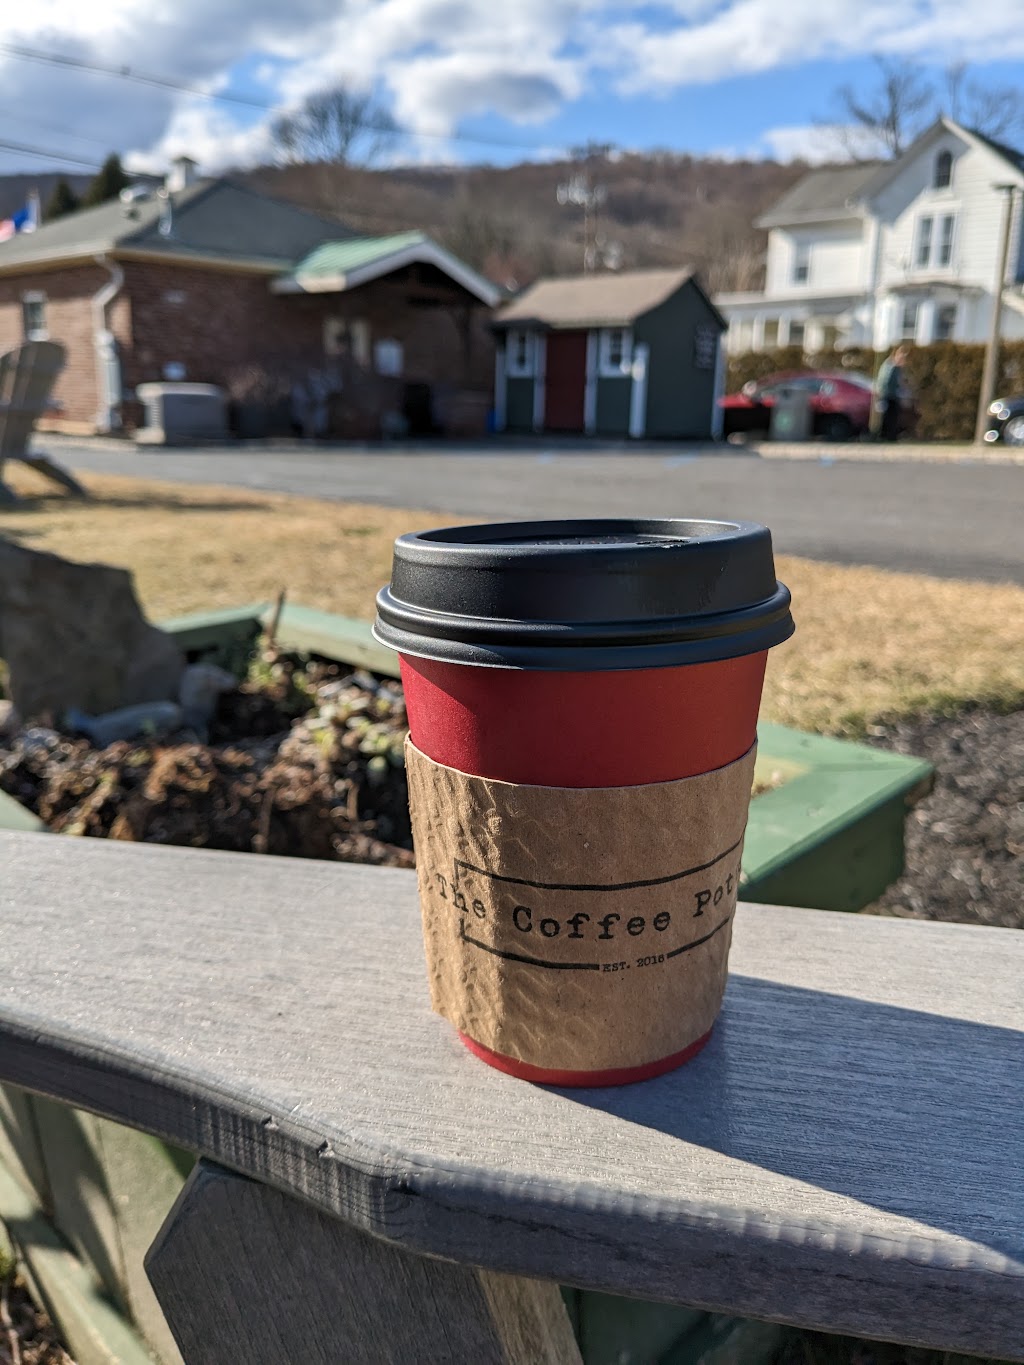 The Coffee Potter | 24 Schooleys Mountain Rd, Long Valley, NJ 07853 | Phone: (201) 230-9890